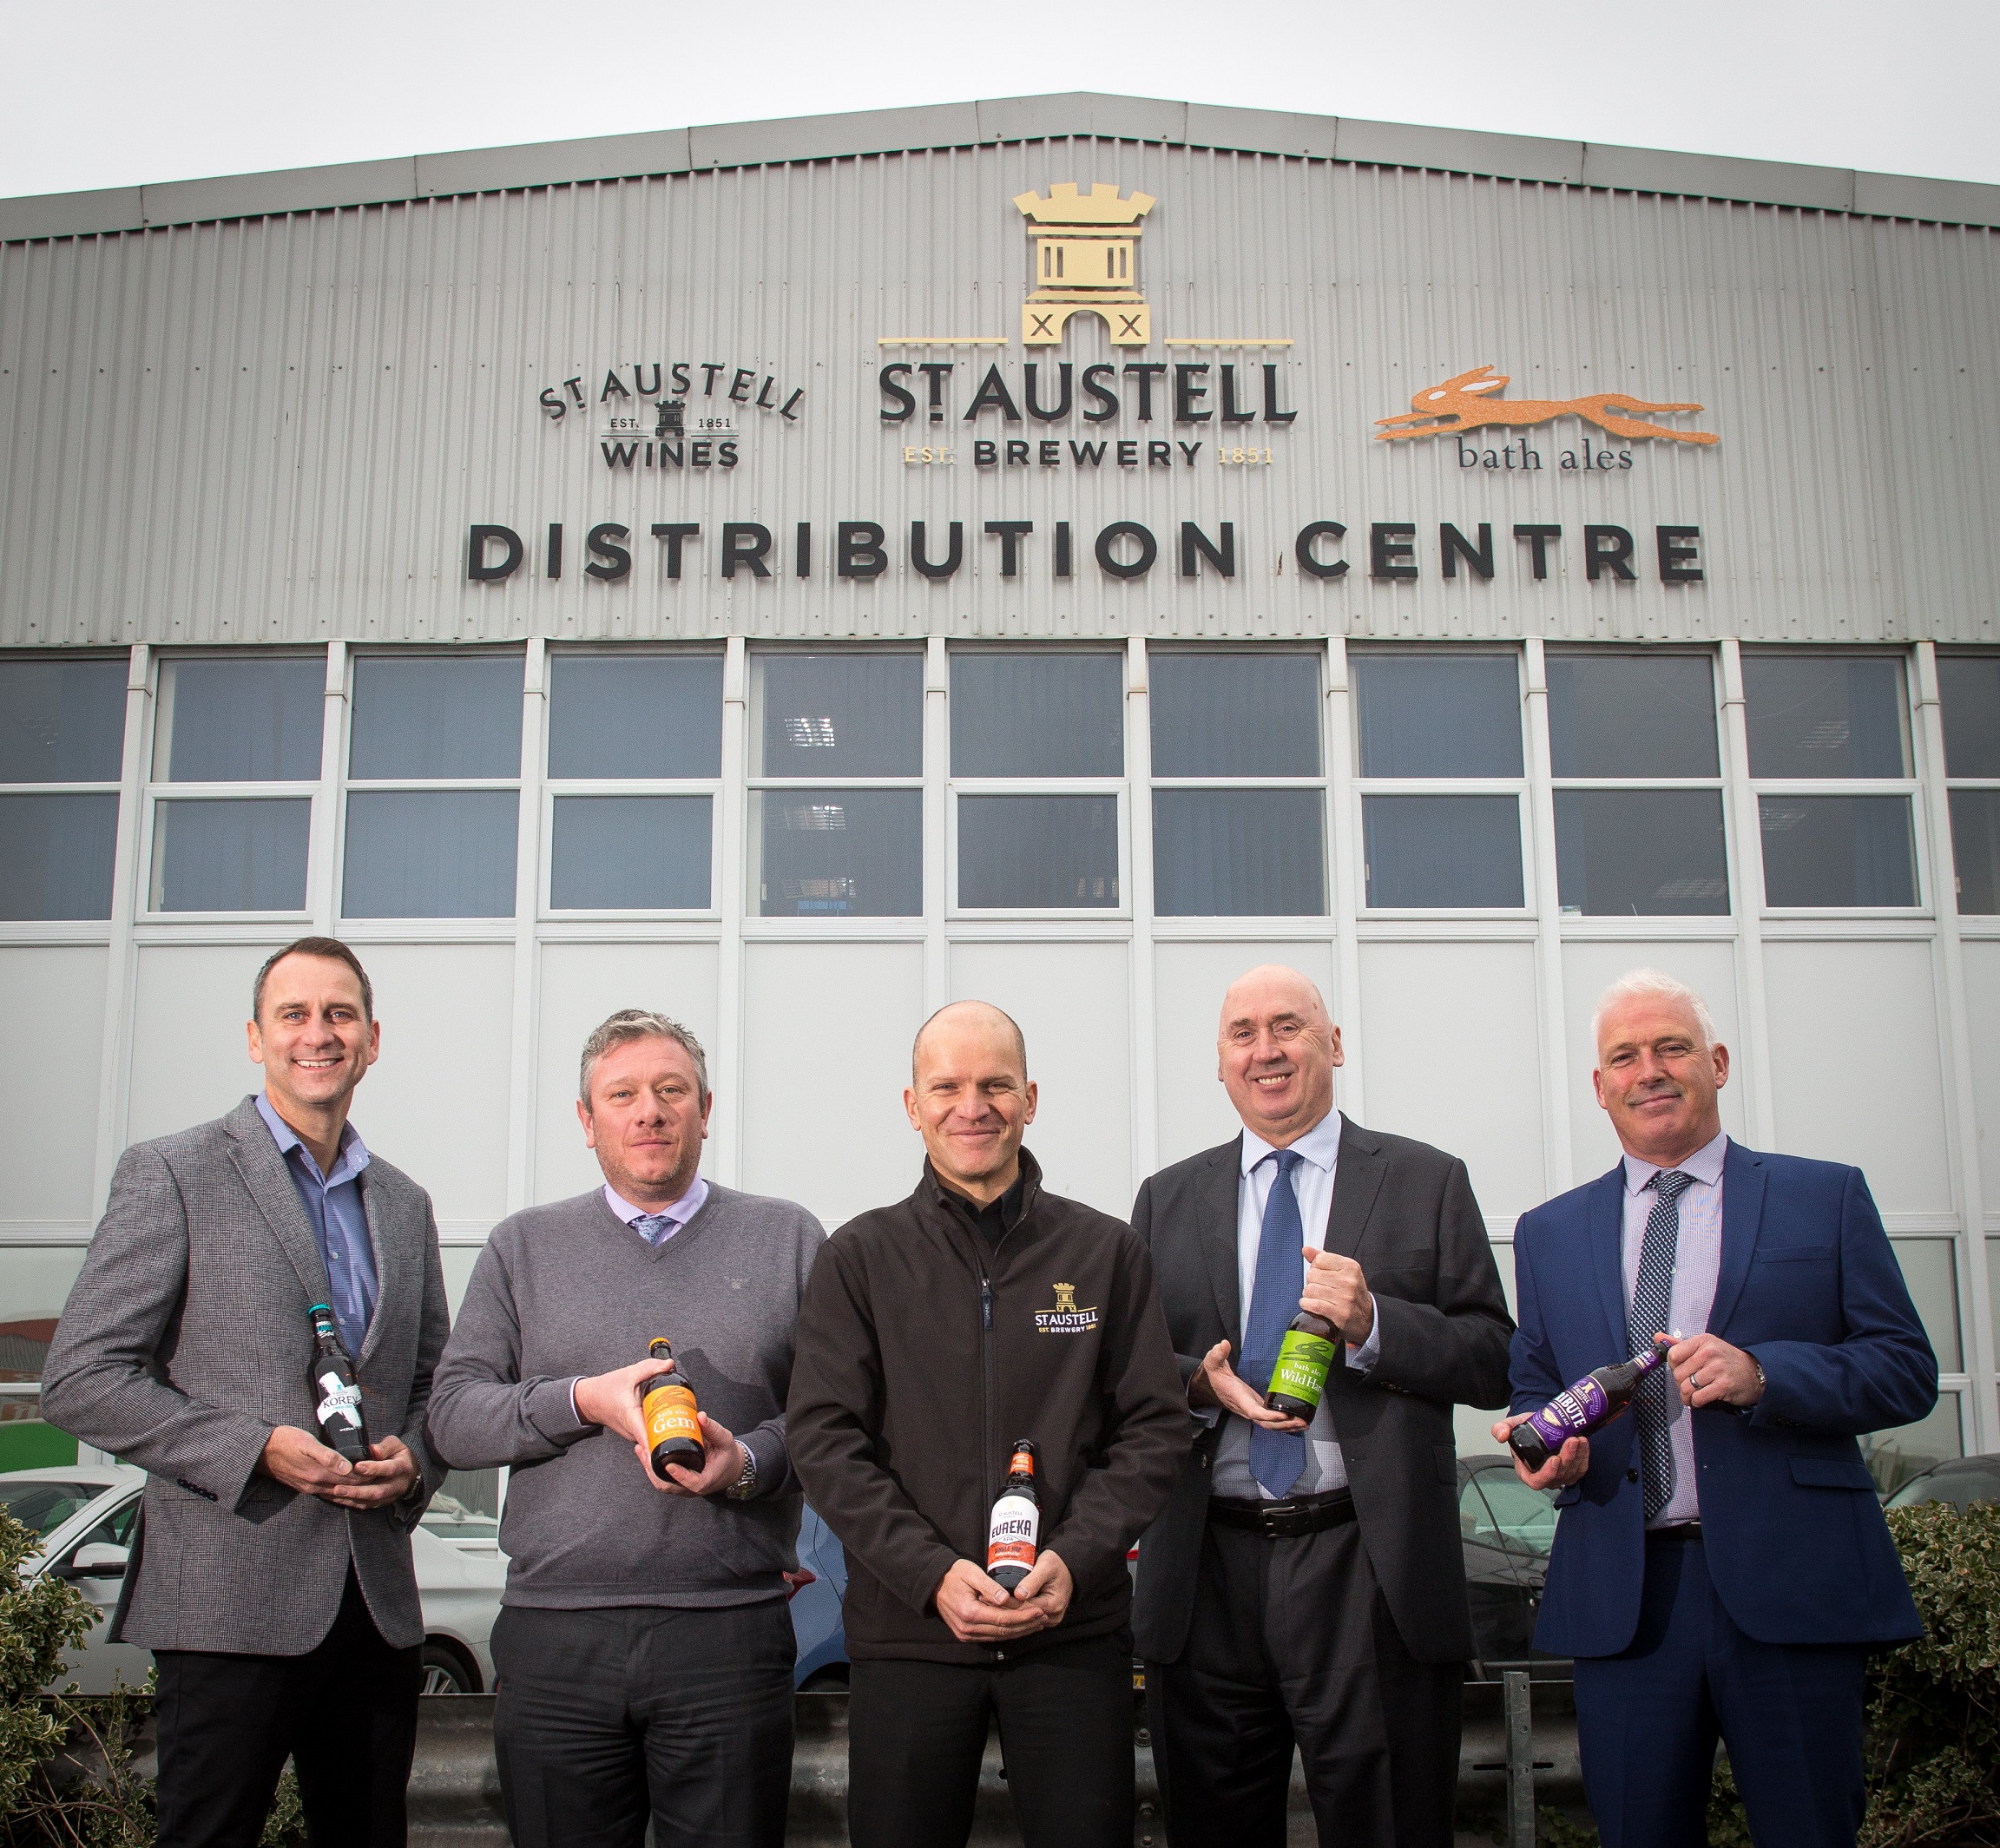 Avonmouth distribution depot to be opened by fast-growing St Austell Brewery